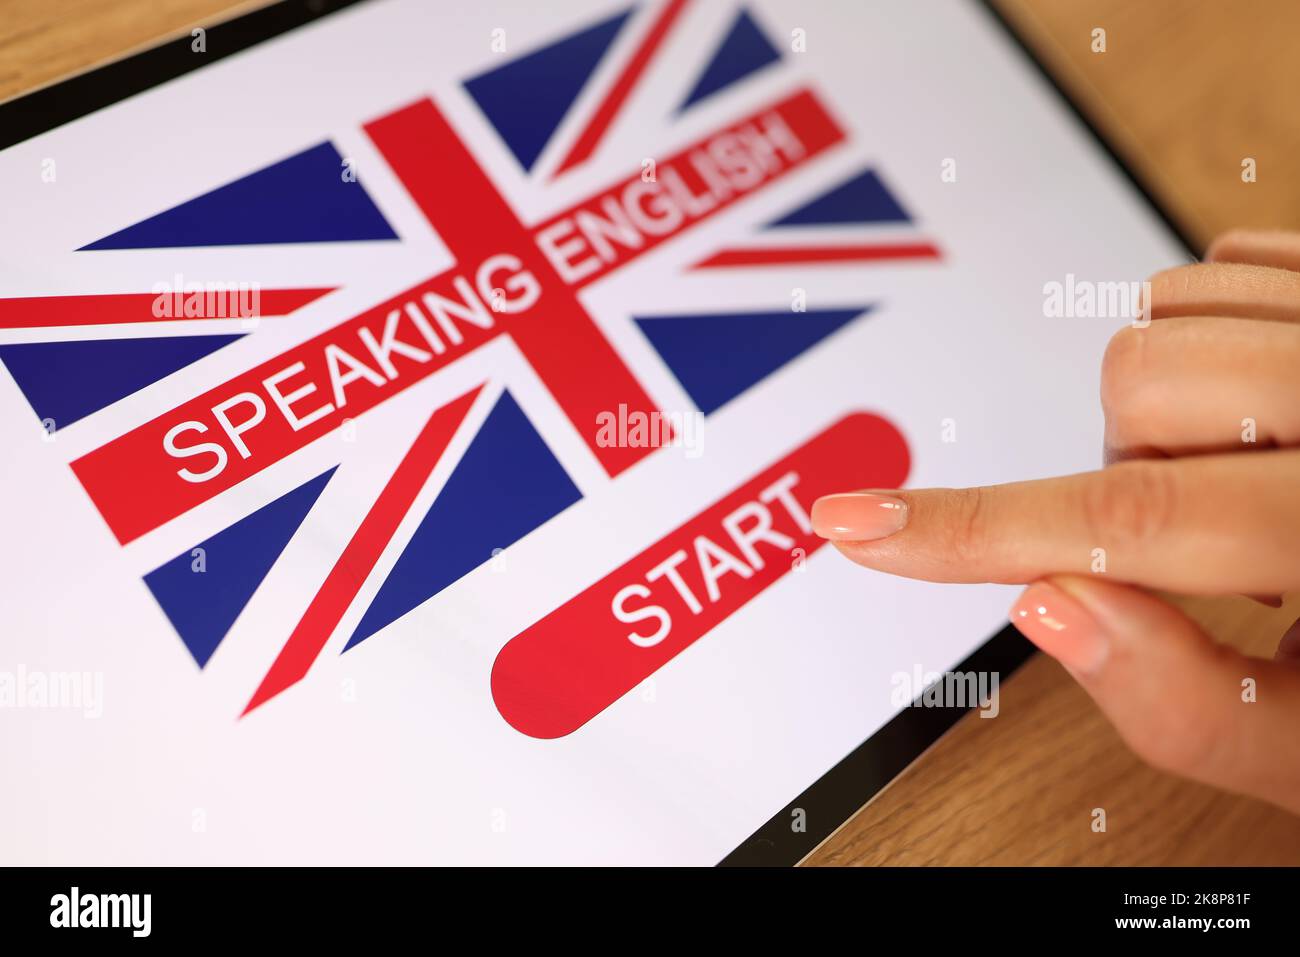 Female hands press button start in application for learning languages Stock Photo